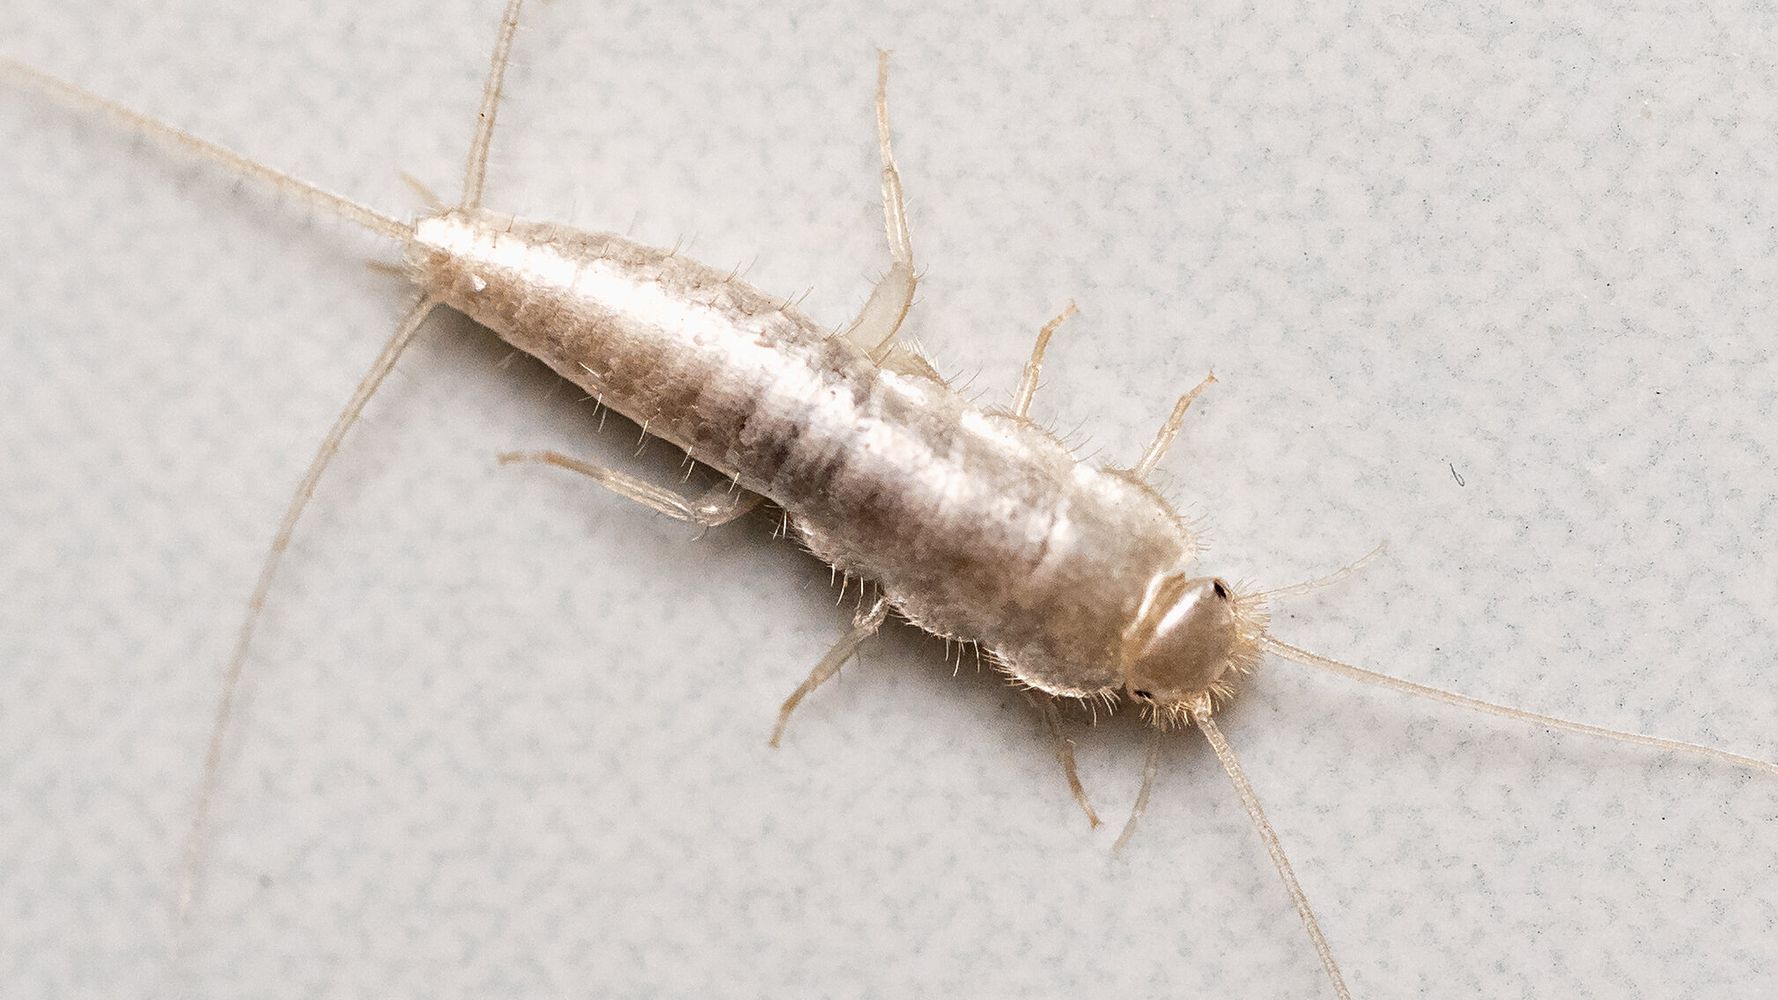 Silverfish: This Bathroom Creepy Crawly Might Be A Sign Of A Leak